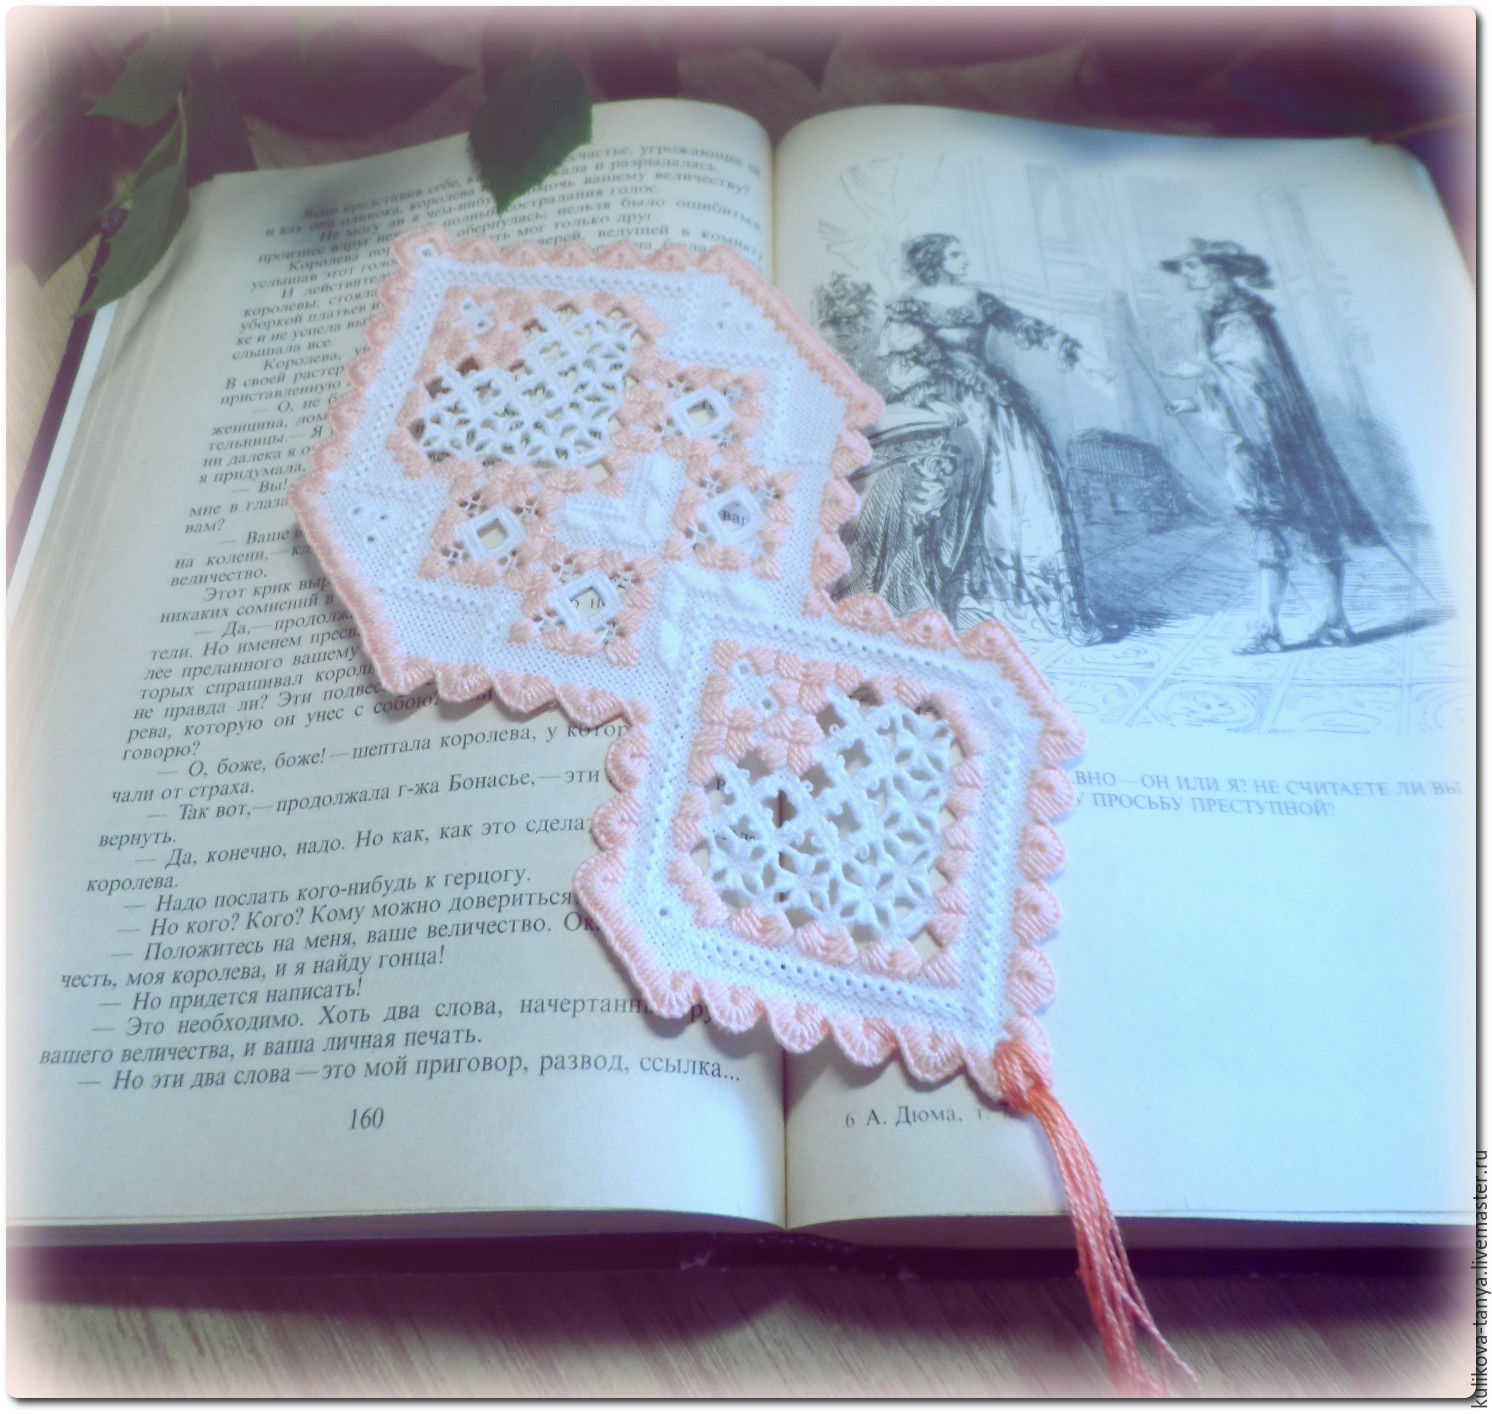 Hand Embroidery Pattern Books Bookmark For Books With Hand Embroidery A Romantic Gift Shop Online On Livemaster With Shipping 4fxidcom Izhevsk